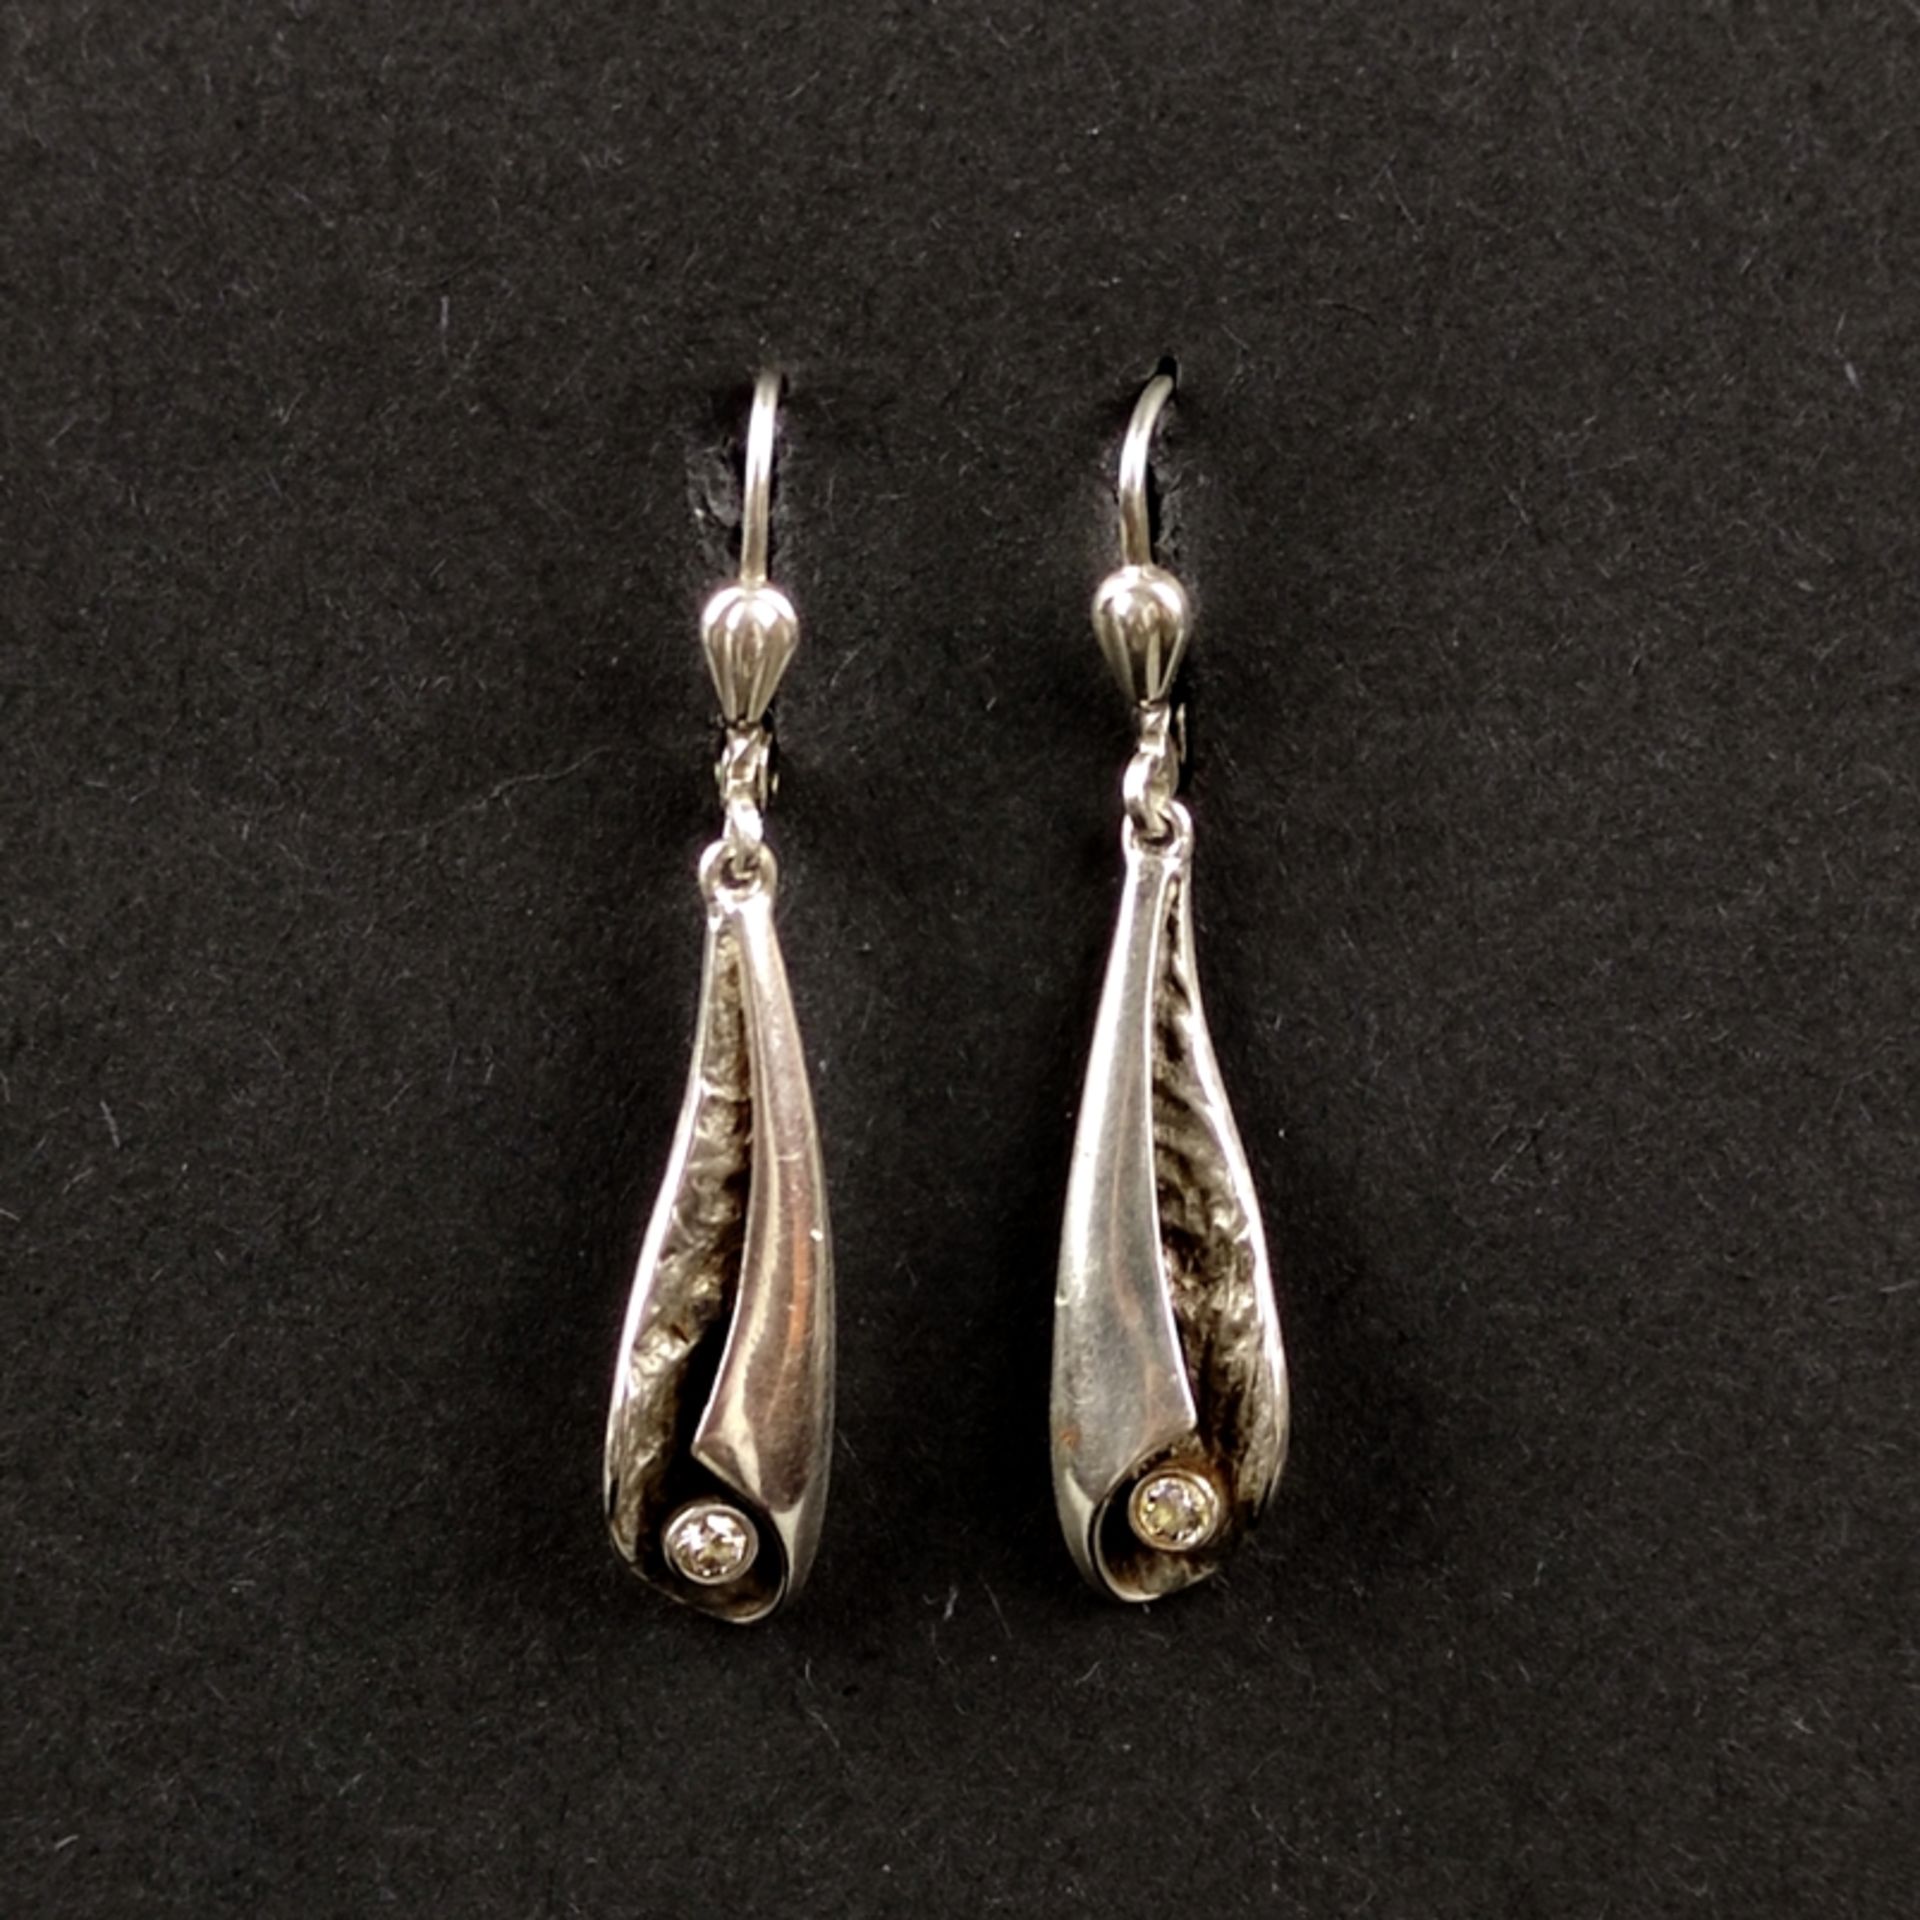 Earrings, silver 925 (hallmarked), 4,3g, earrings with curved suspensions, each set with a round fa